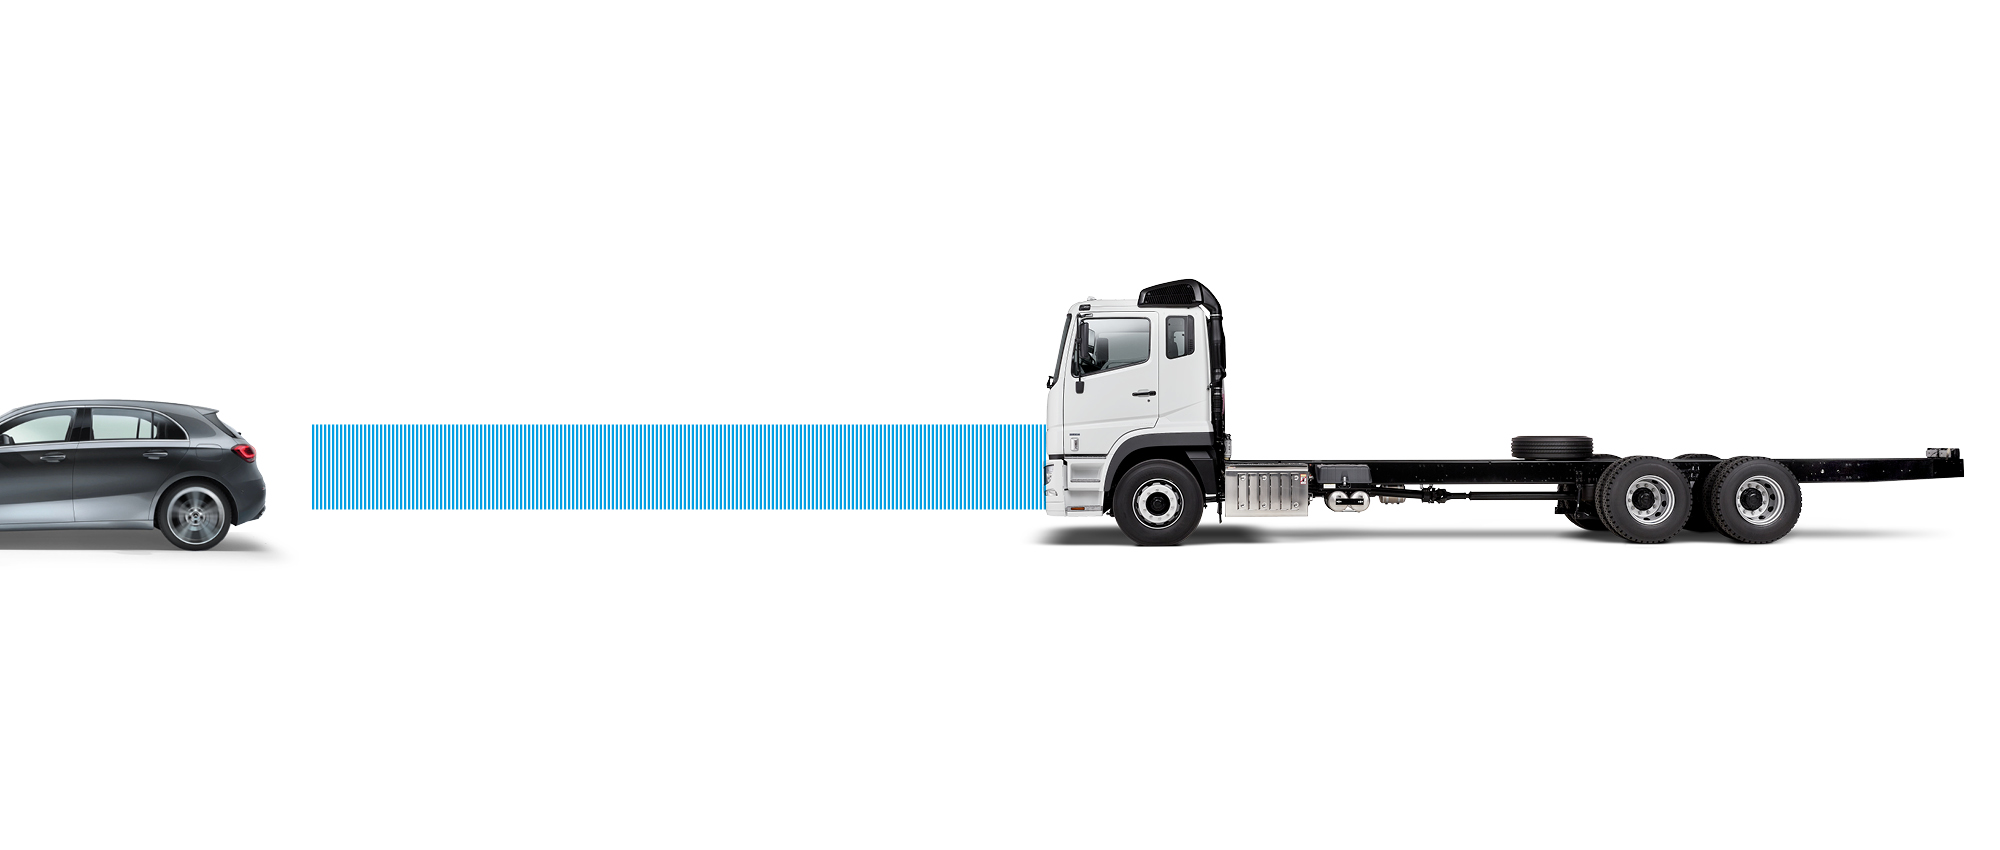 Active Drive Assist helps to keep the truck in the middle of the lane and prevents the vehicle from moving out of its lane 